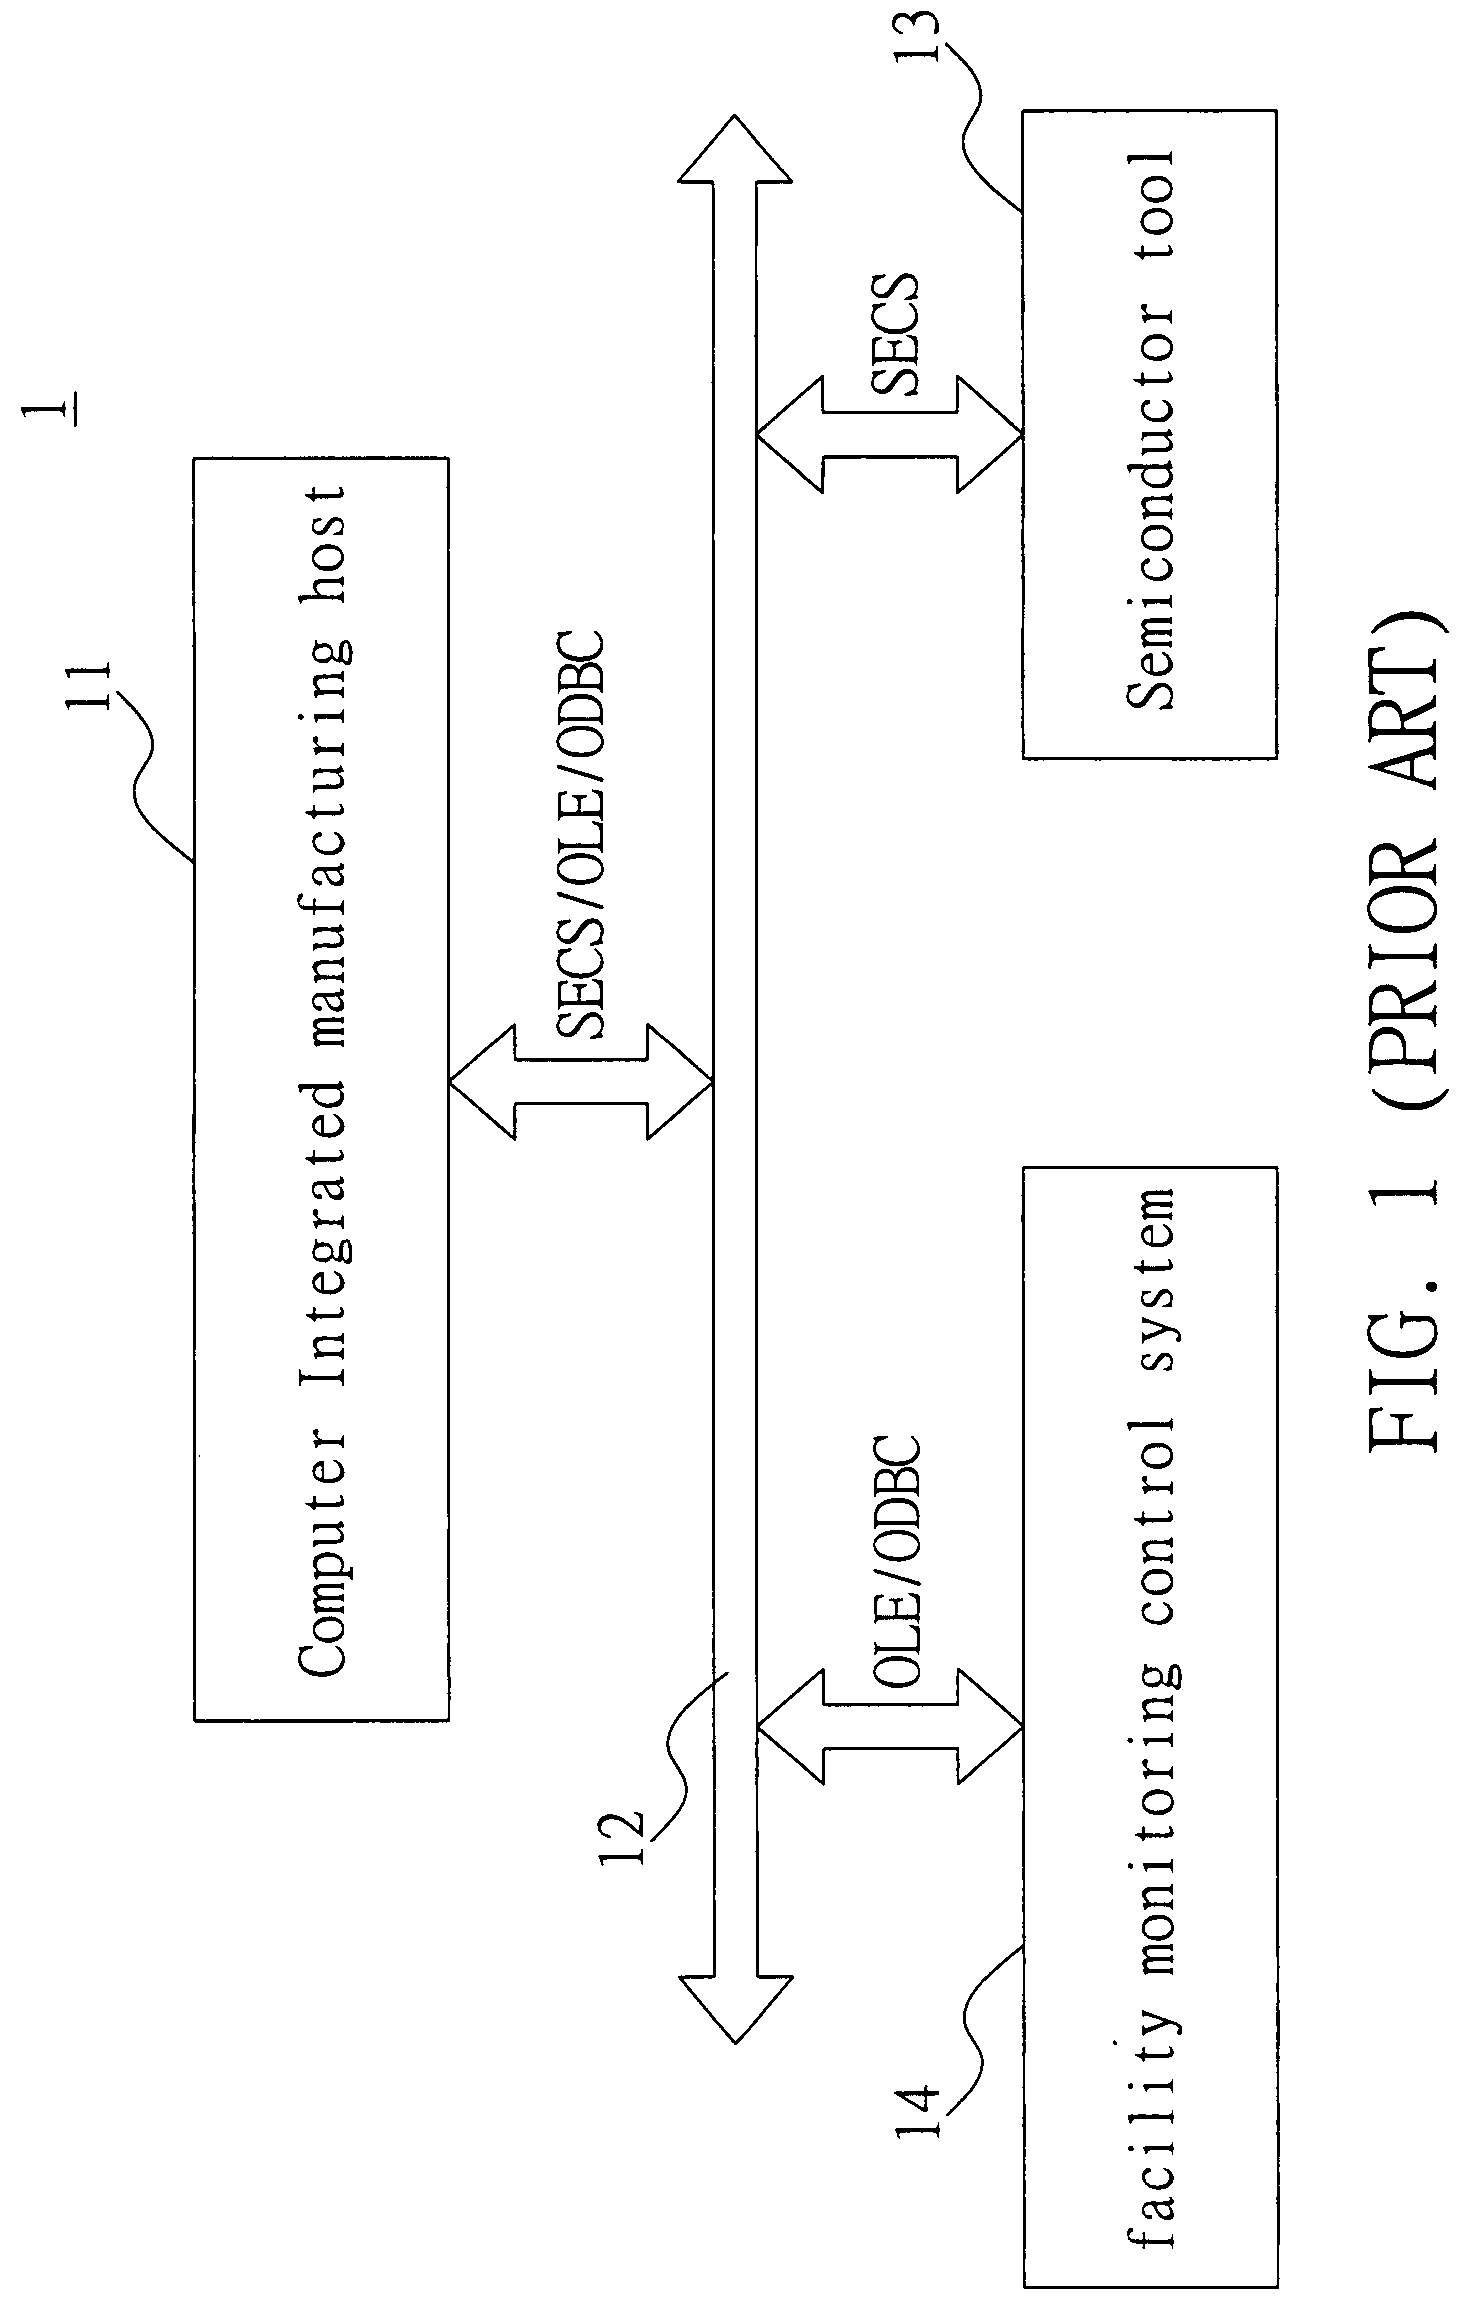 Real-time fault detection and classification system in use with a semiconductor fabrication process